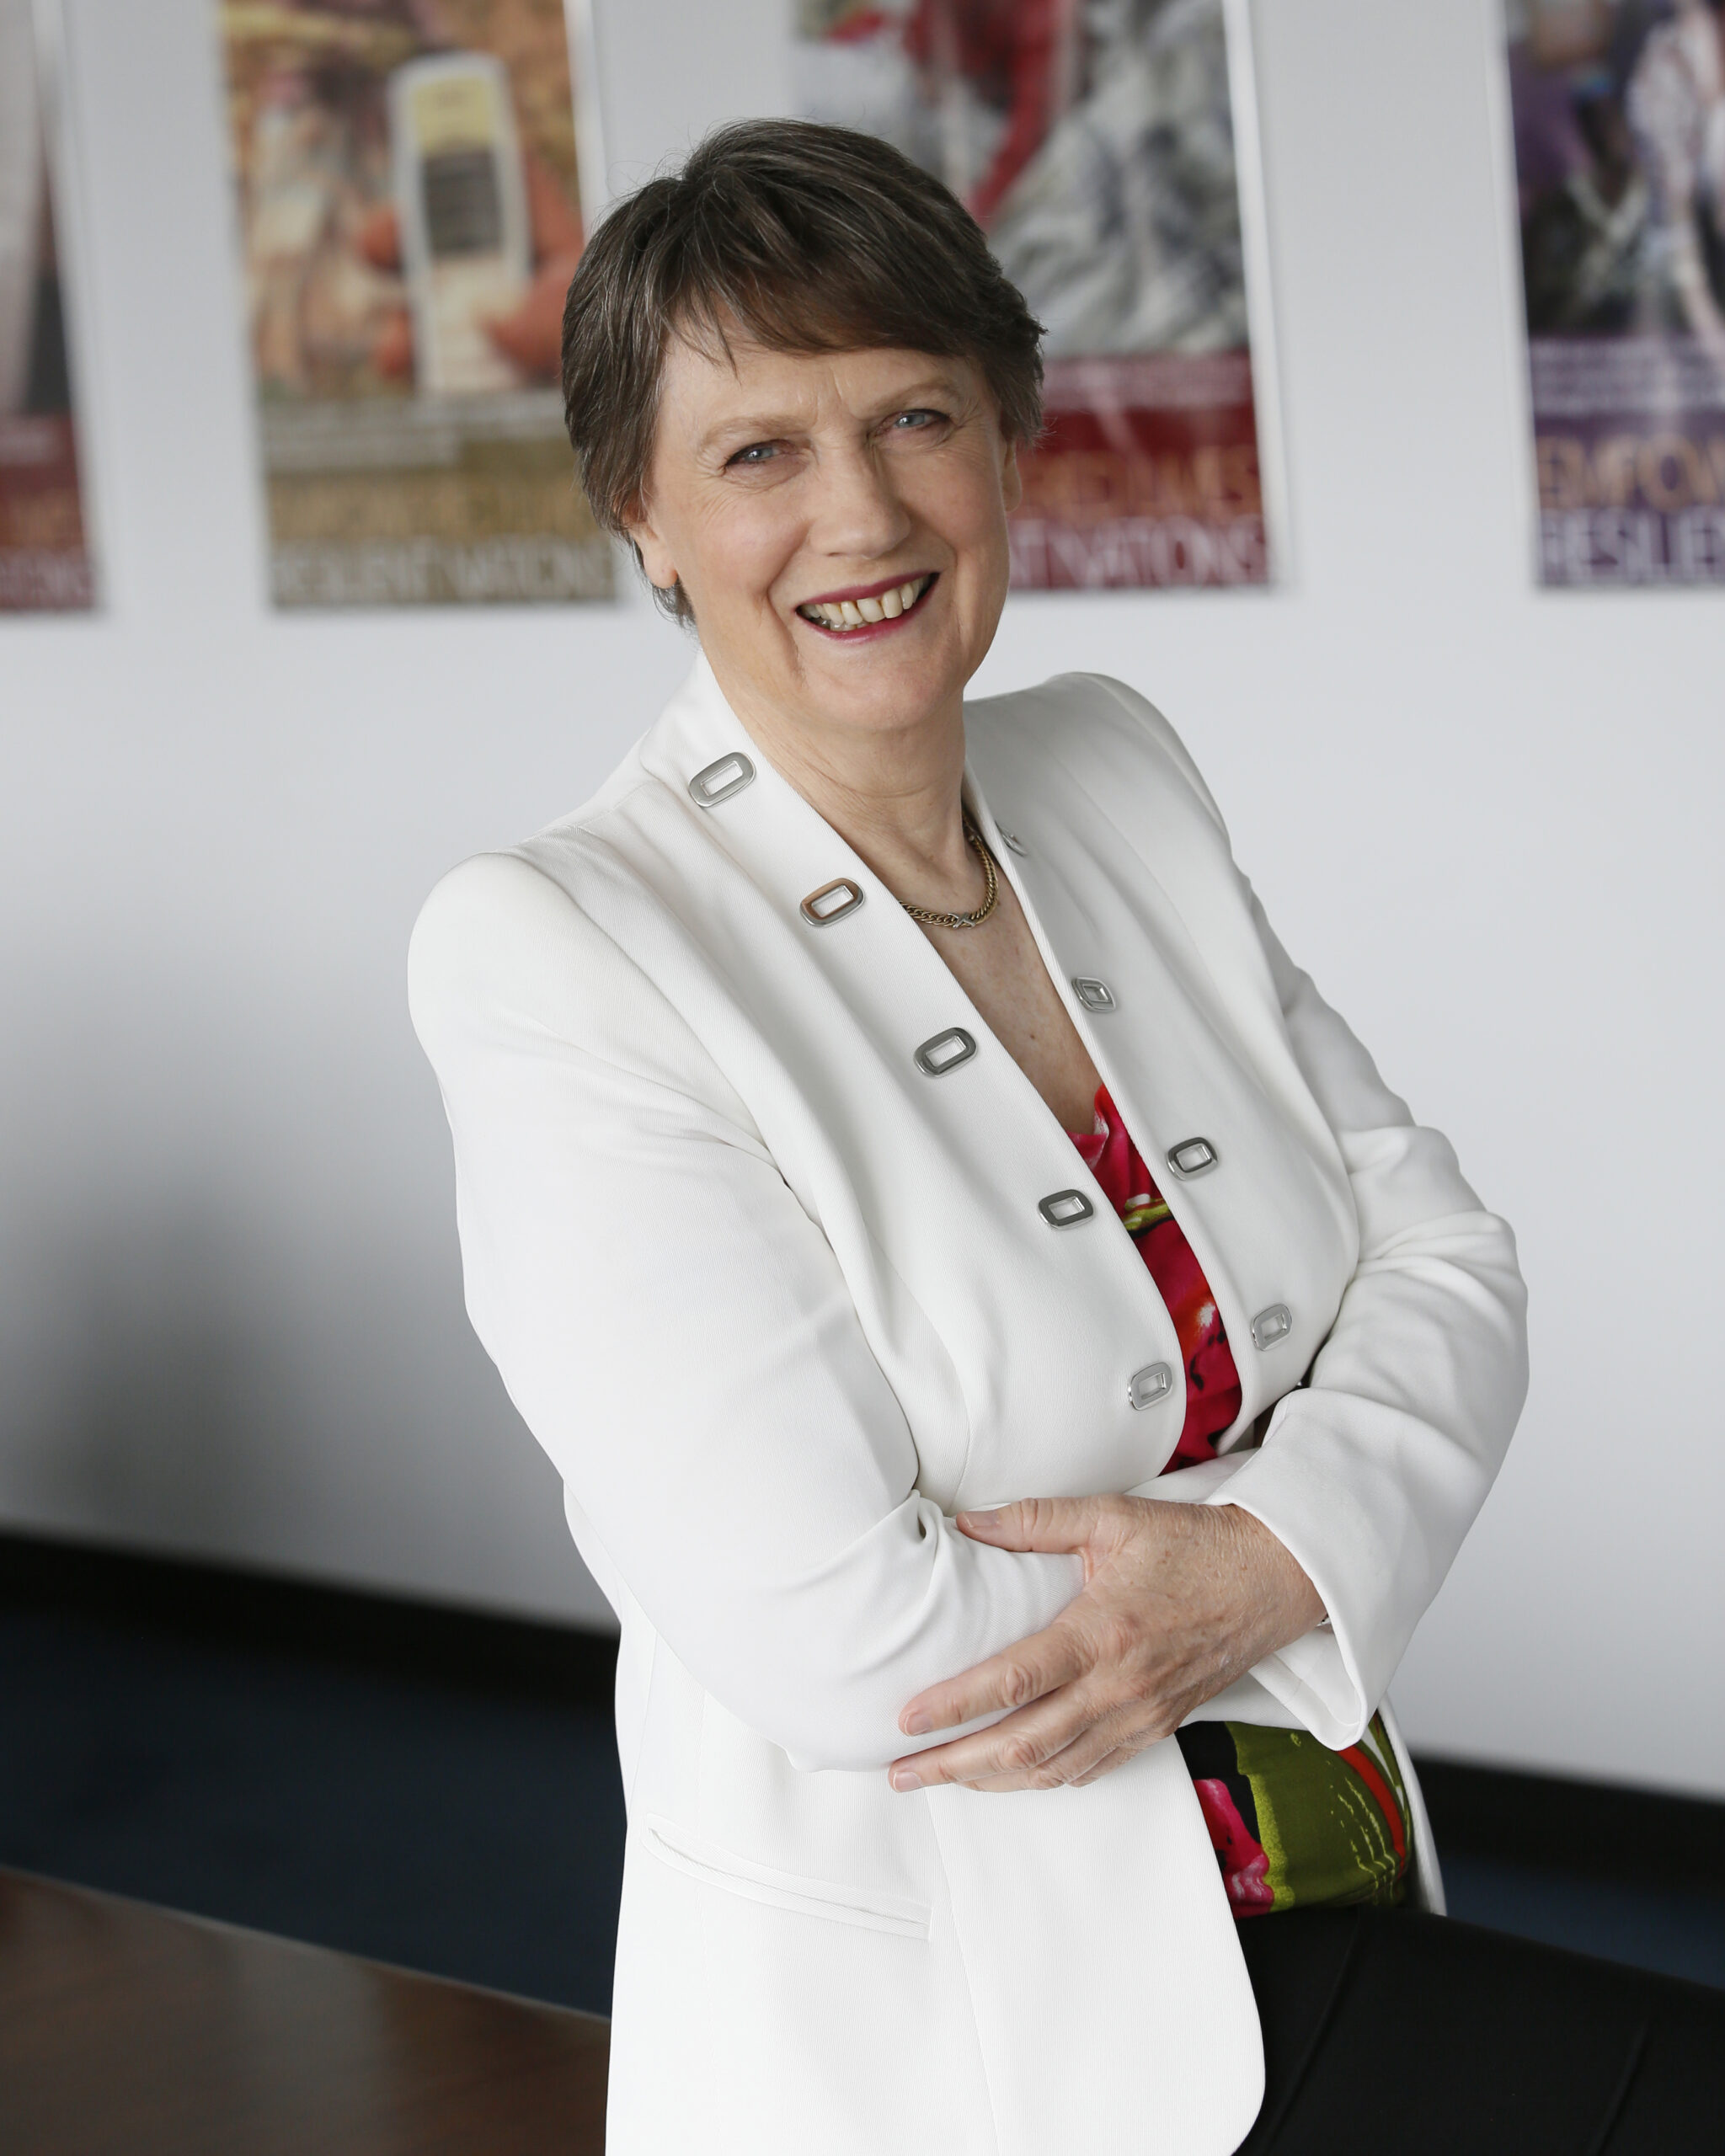 Helen Clark named one of the world’s most powerful women